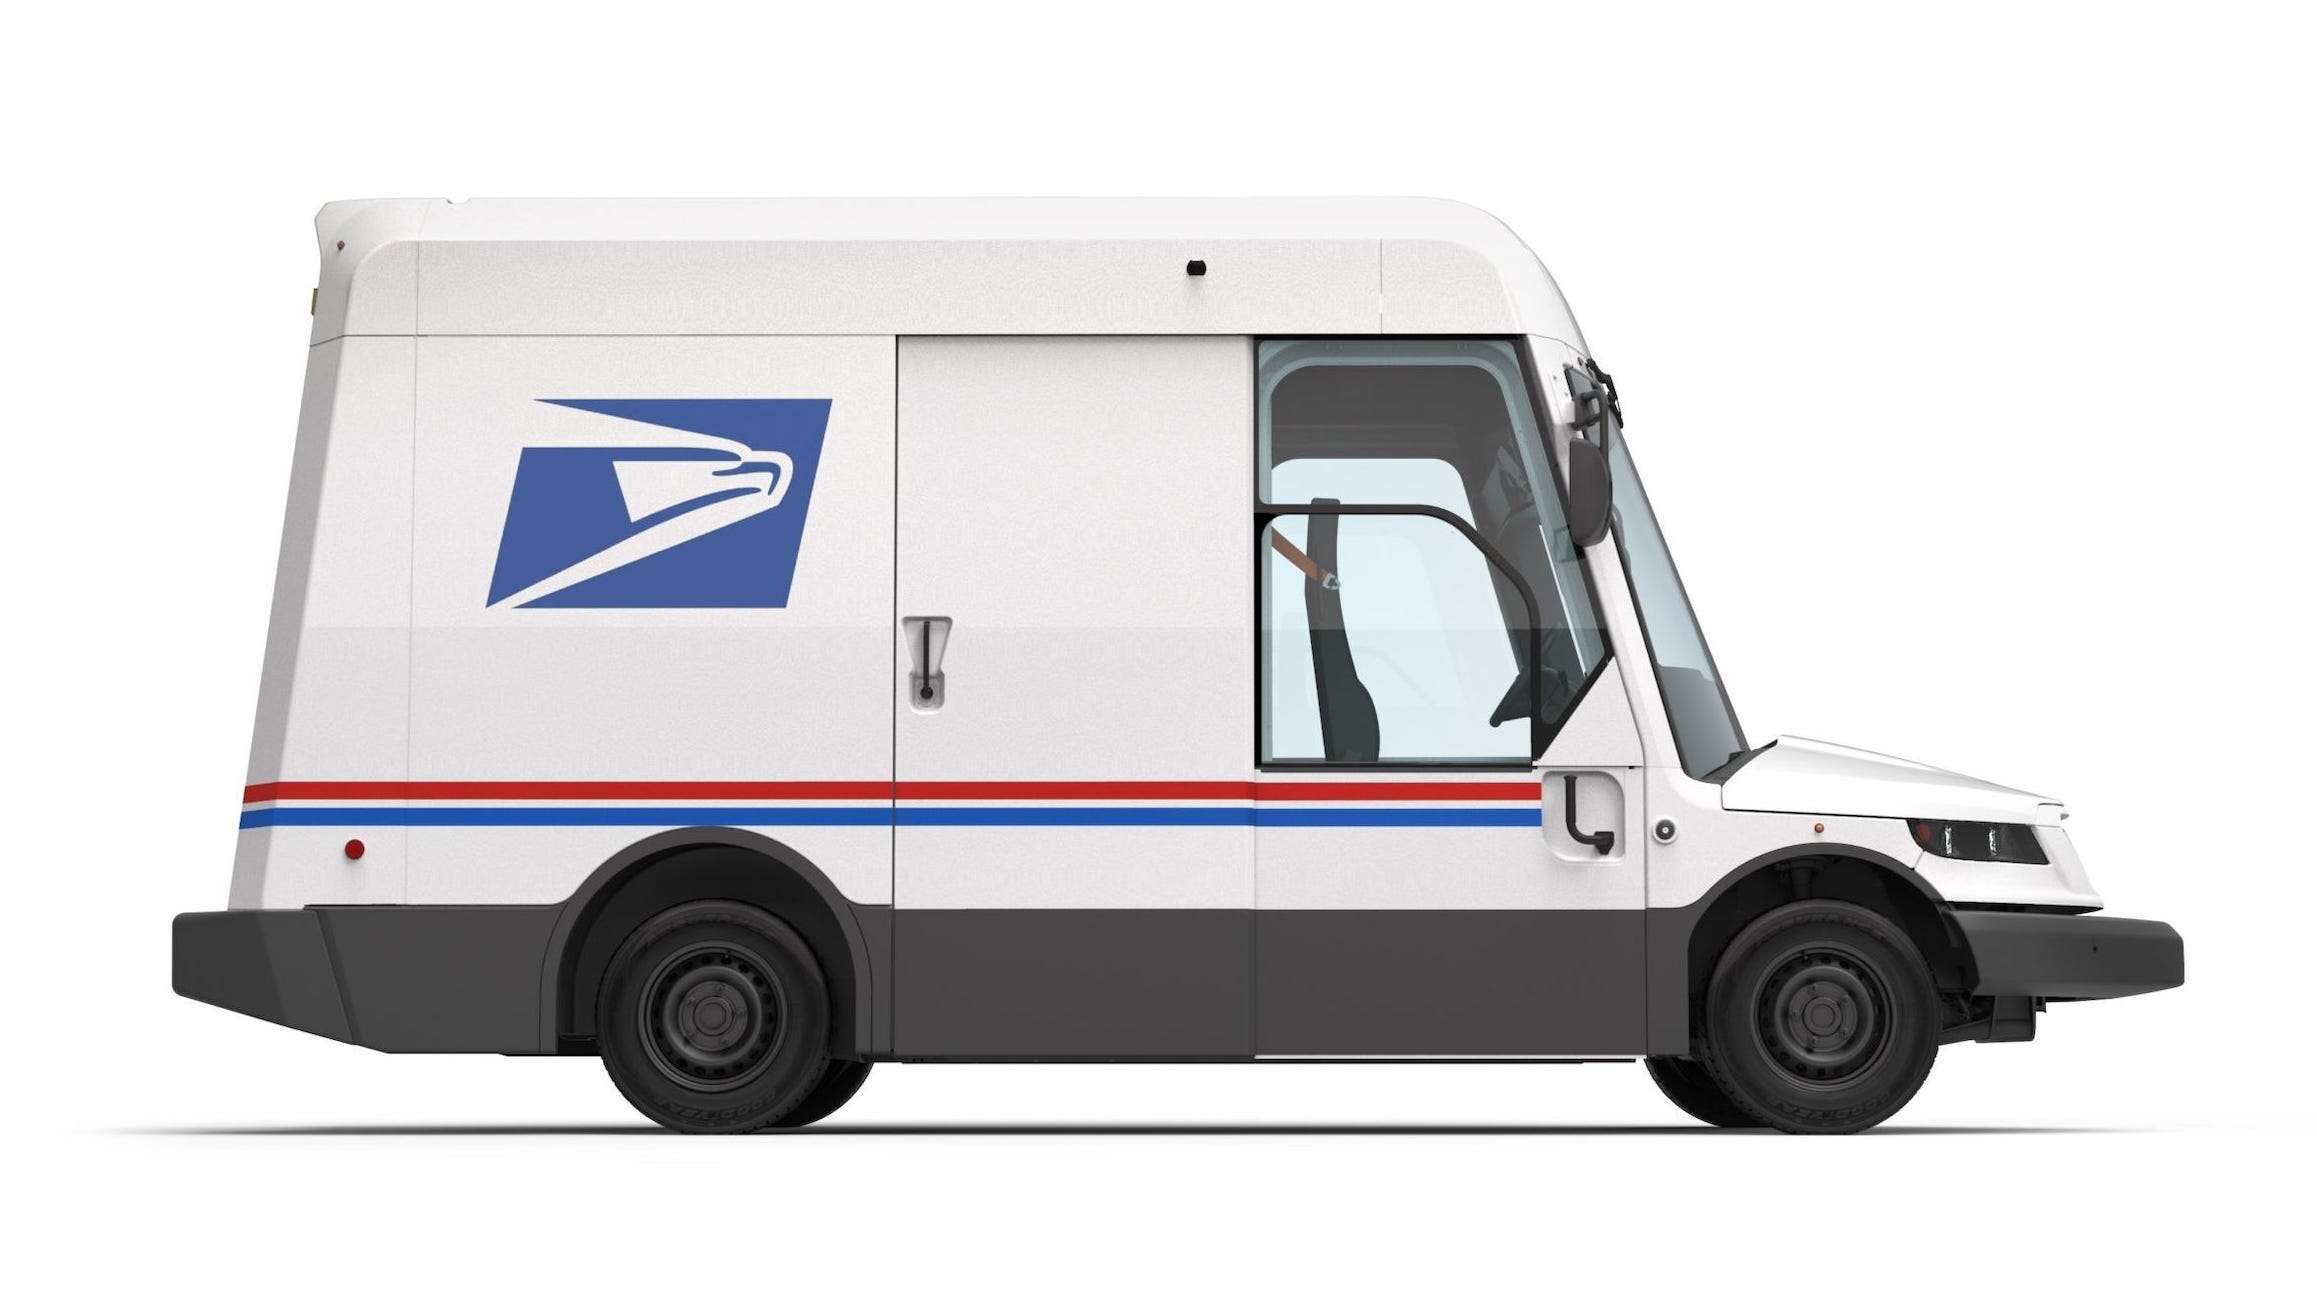 The US Postal Service revealed its first new mail truck in over 30